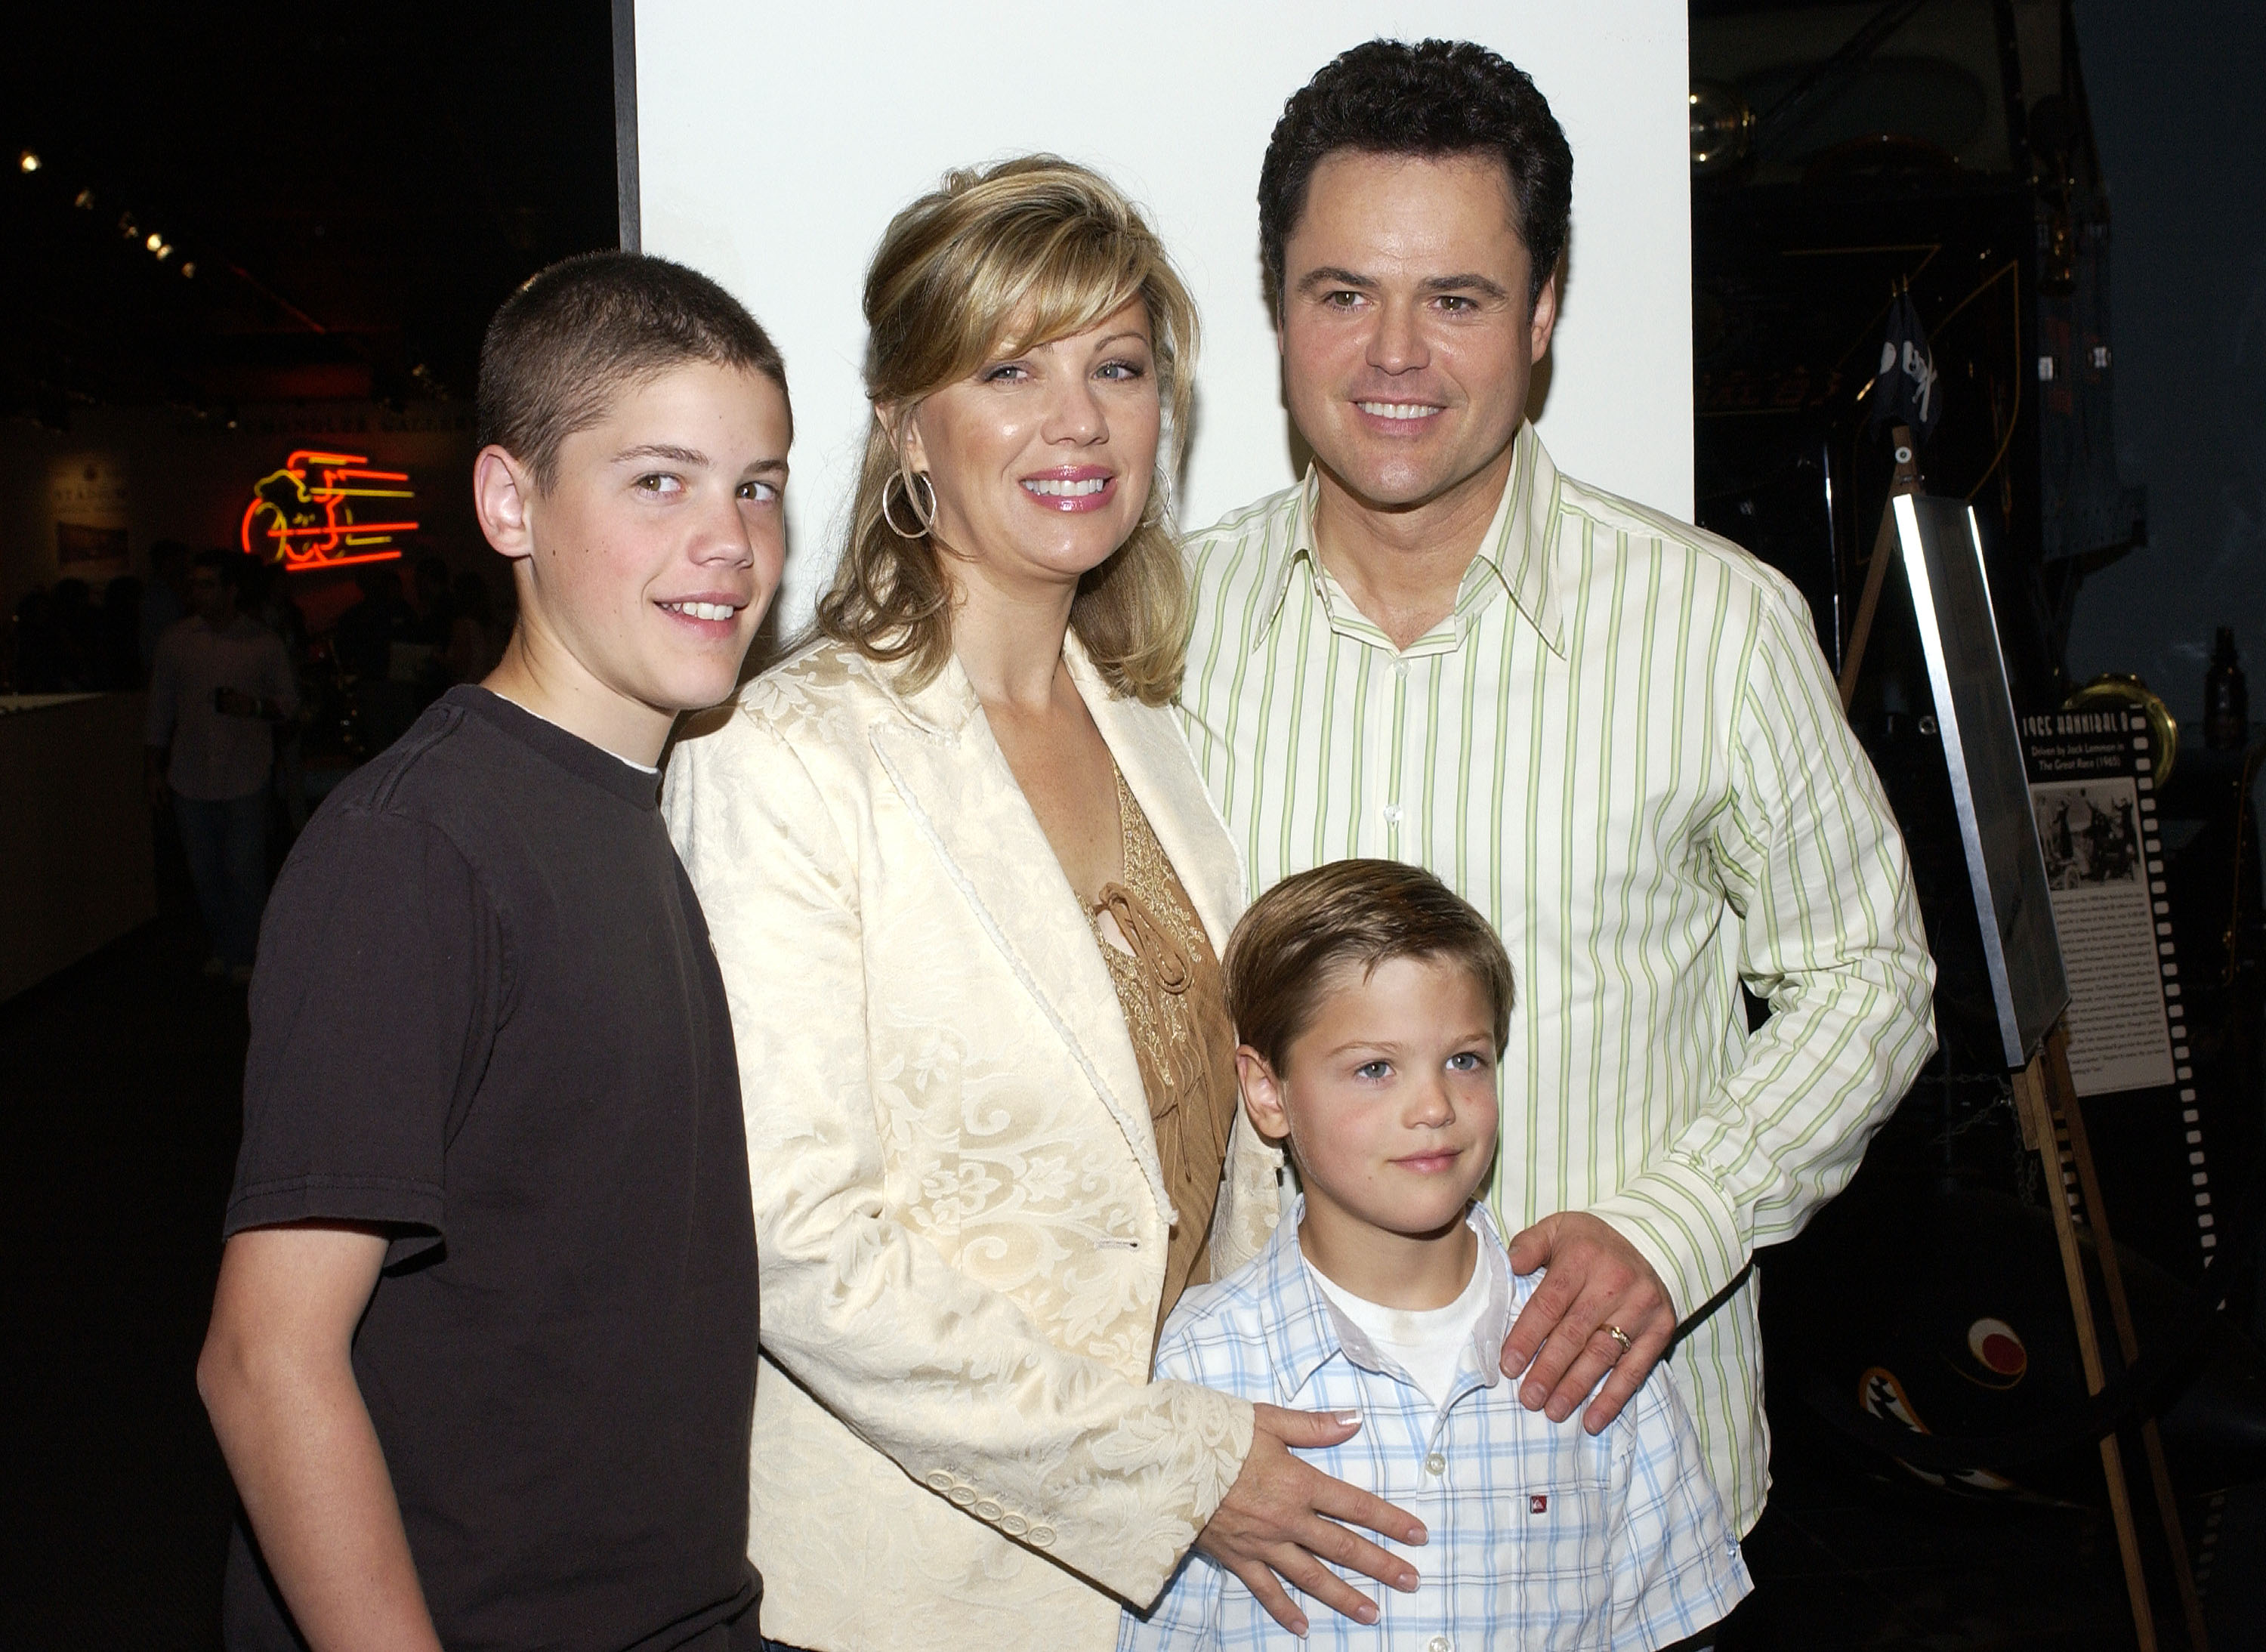 Donny Osmond, his wife Debbie and their sons Chris (l) and Joshua (r) arrive at the Golden Dads Awards ceremony at the Peterson Automotive Museum on June 15, 2005, in Los Angeles, California | Source: Getty Images